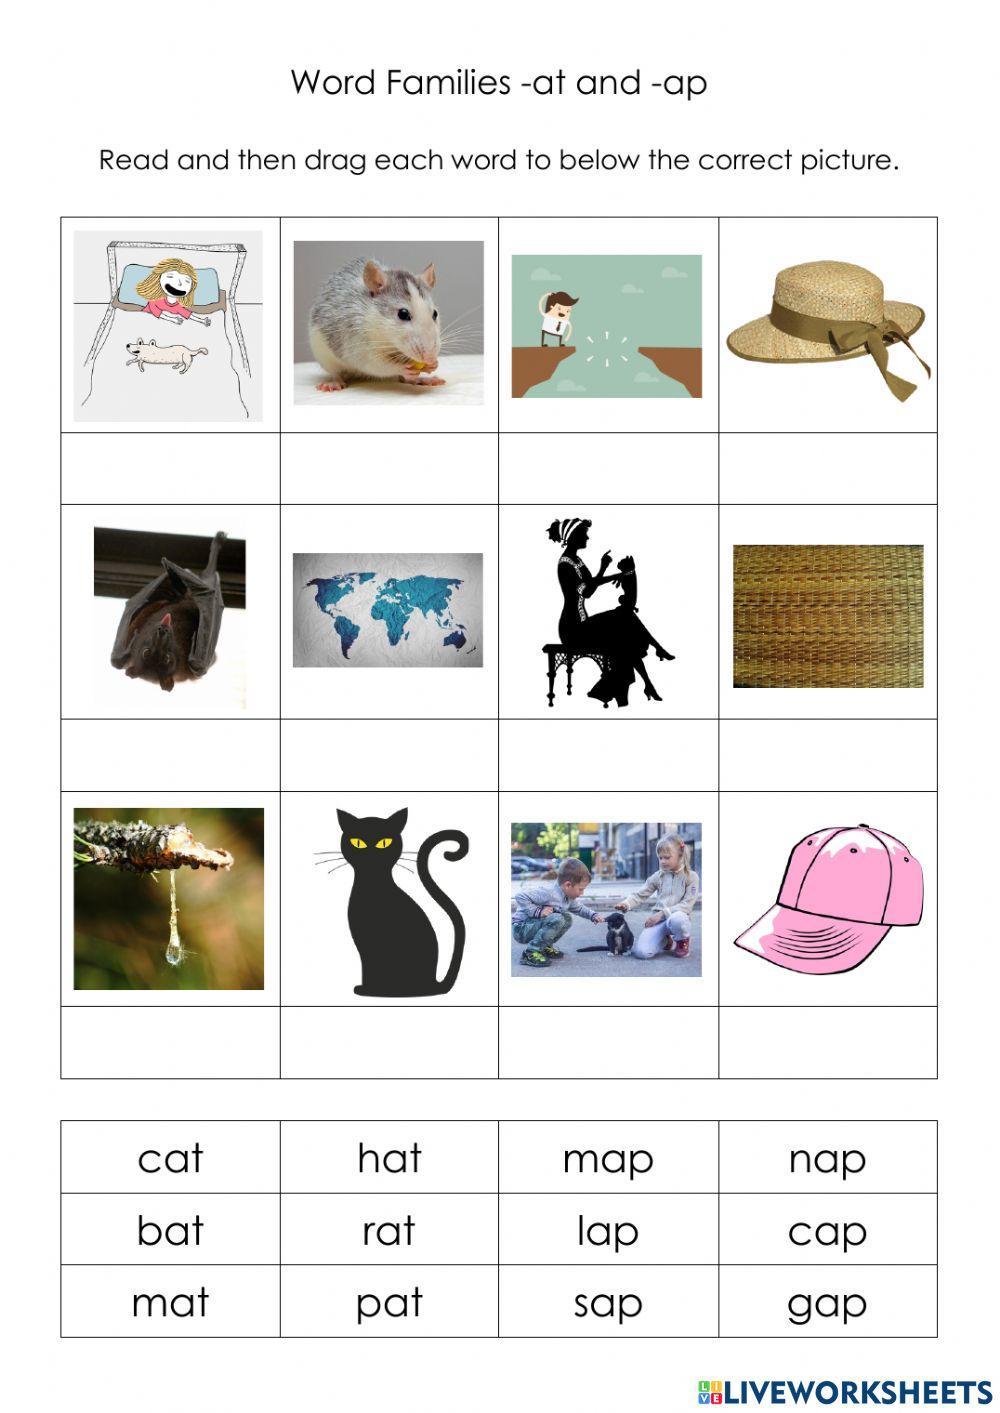 Word Families -at and -ap